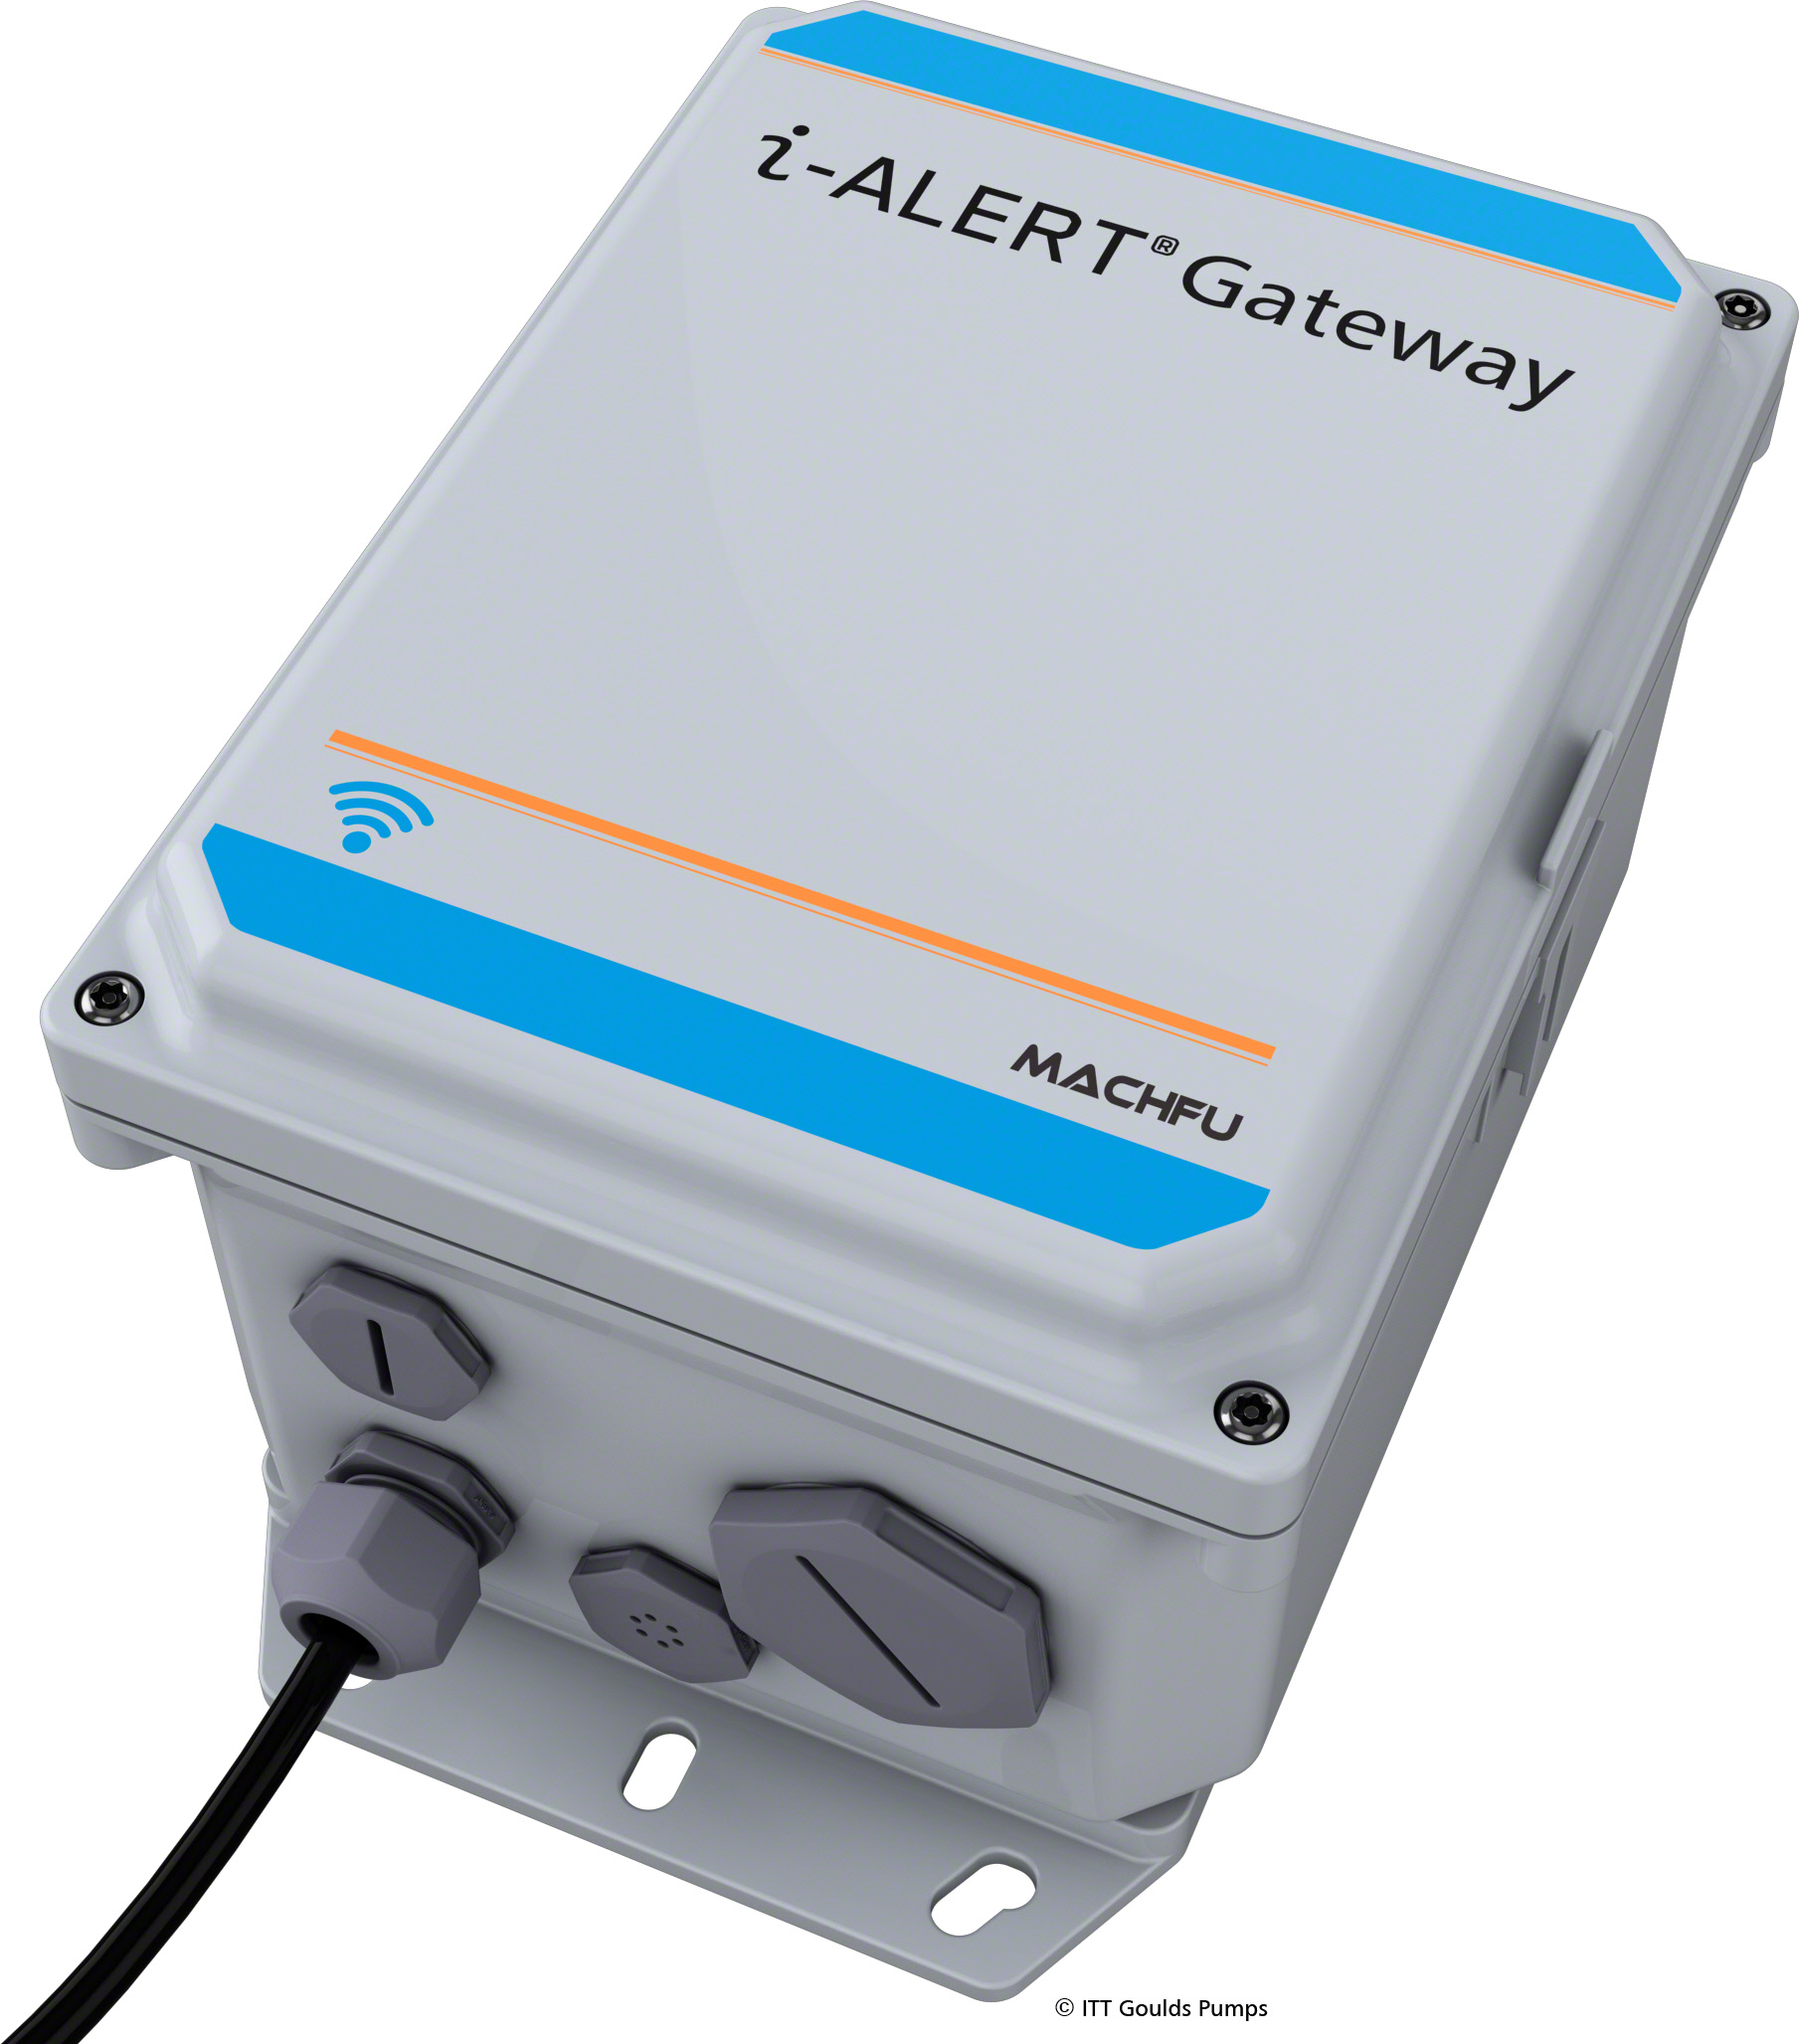 The i-Alert Gateway automatically connects to the cellular network and configures all the i-Alert sensors in range.